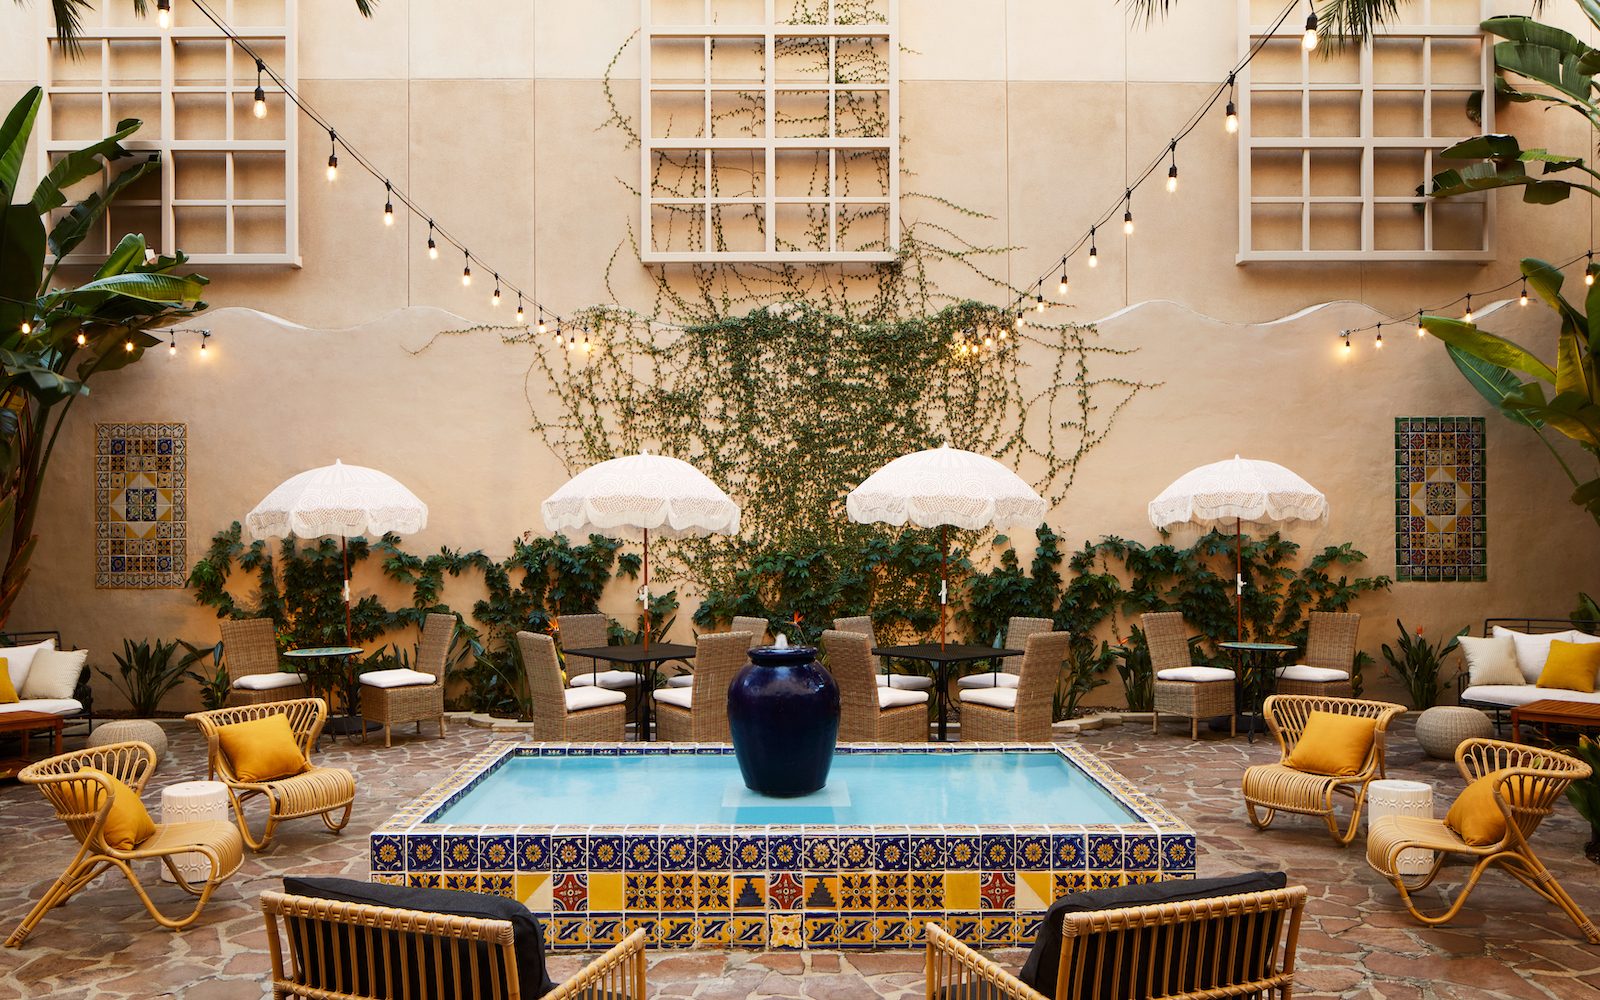 Pasadena Hotel & Pool courtyard with outdoor furniture and yellow pops of colour